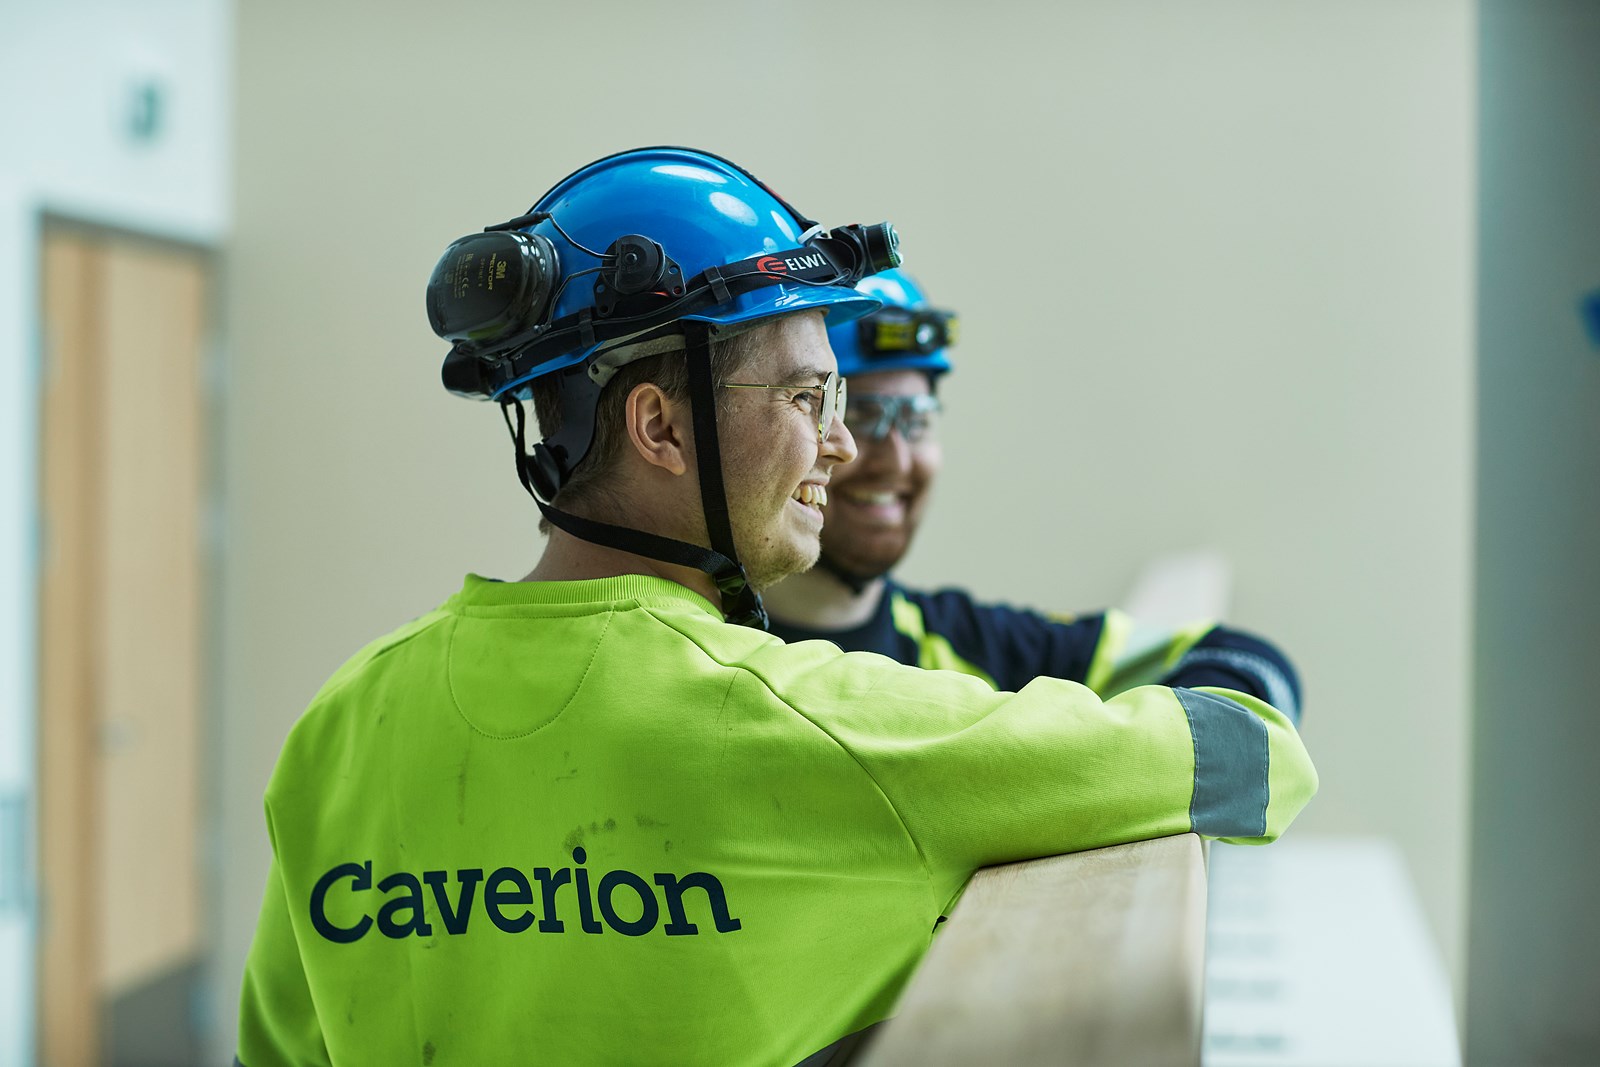 Caverion workers at vantage point, smiling (MG_1651).jpg